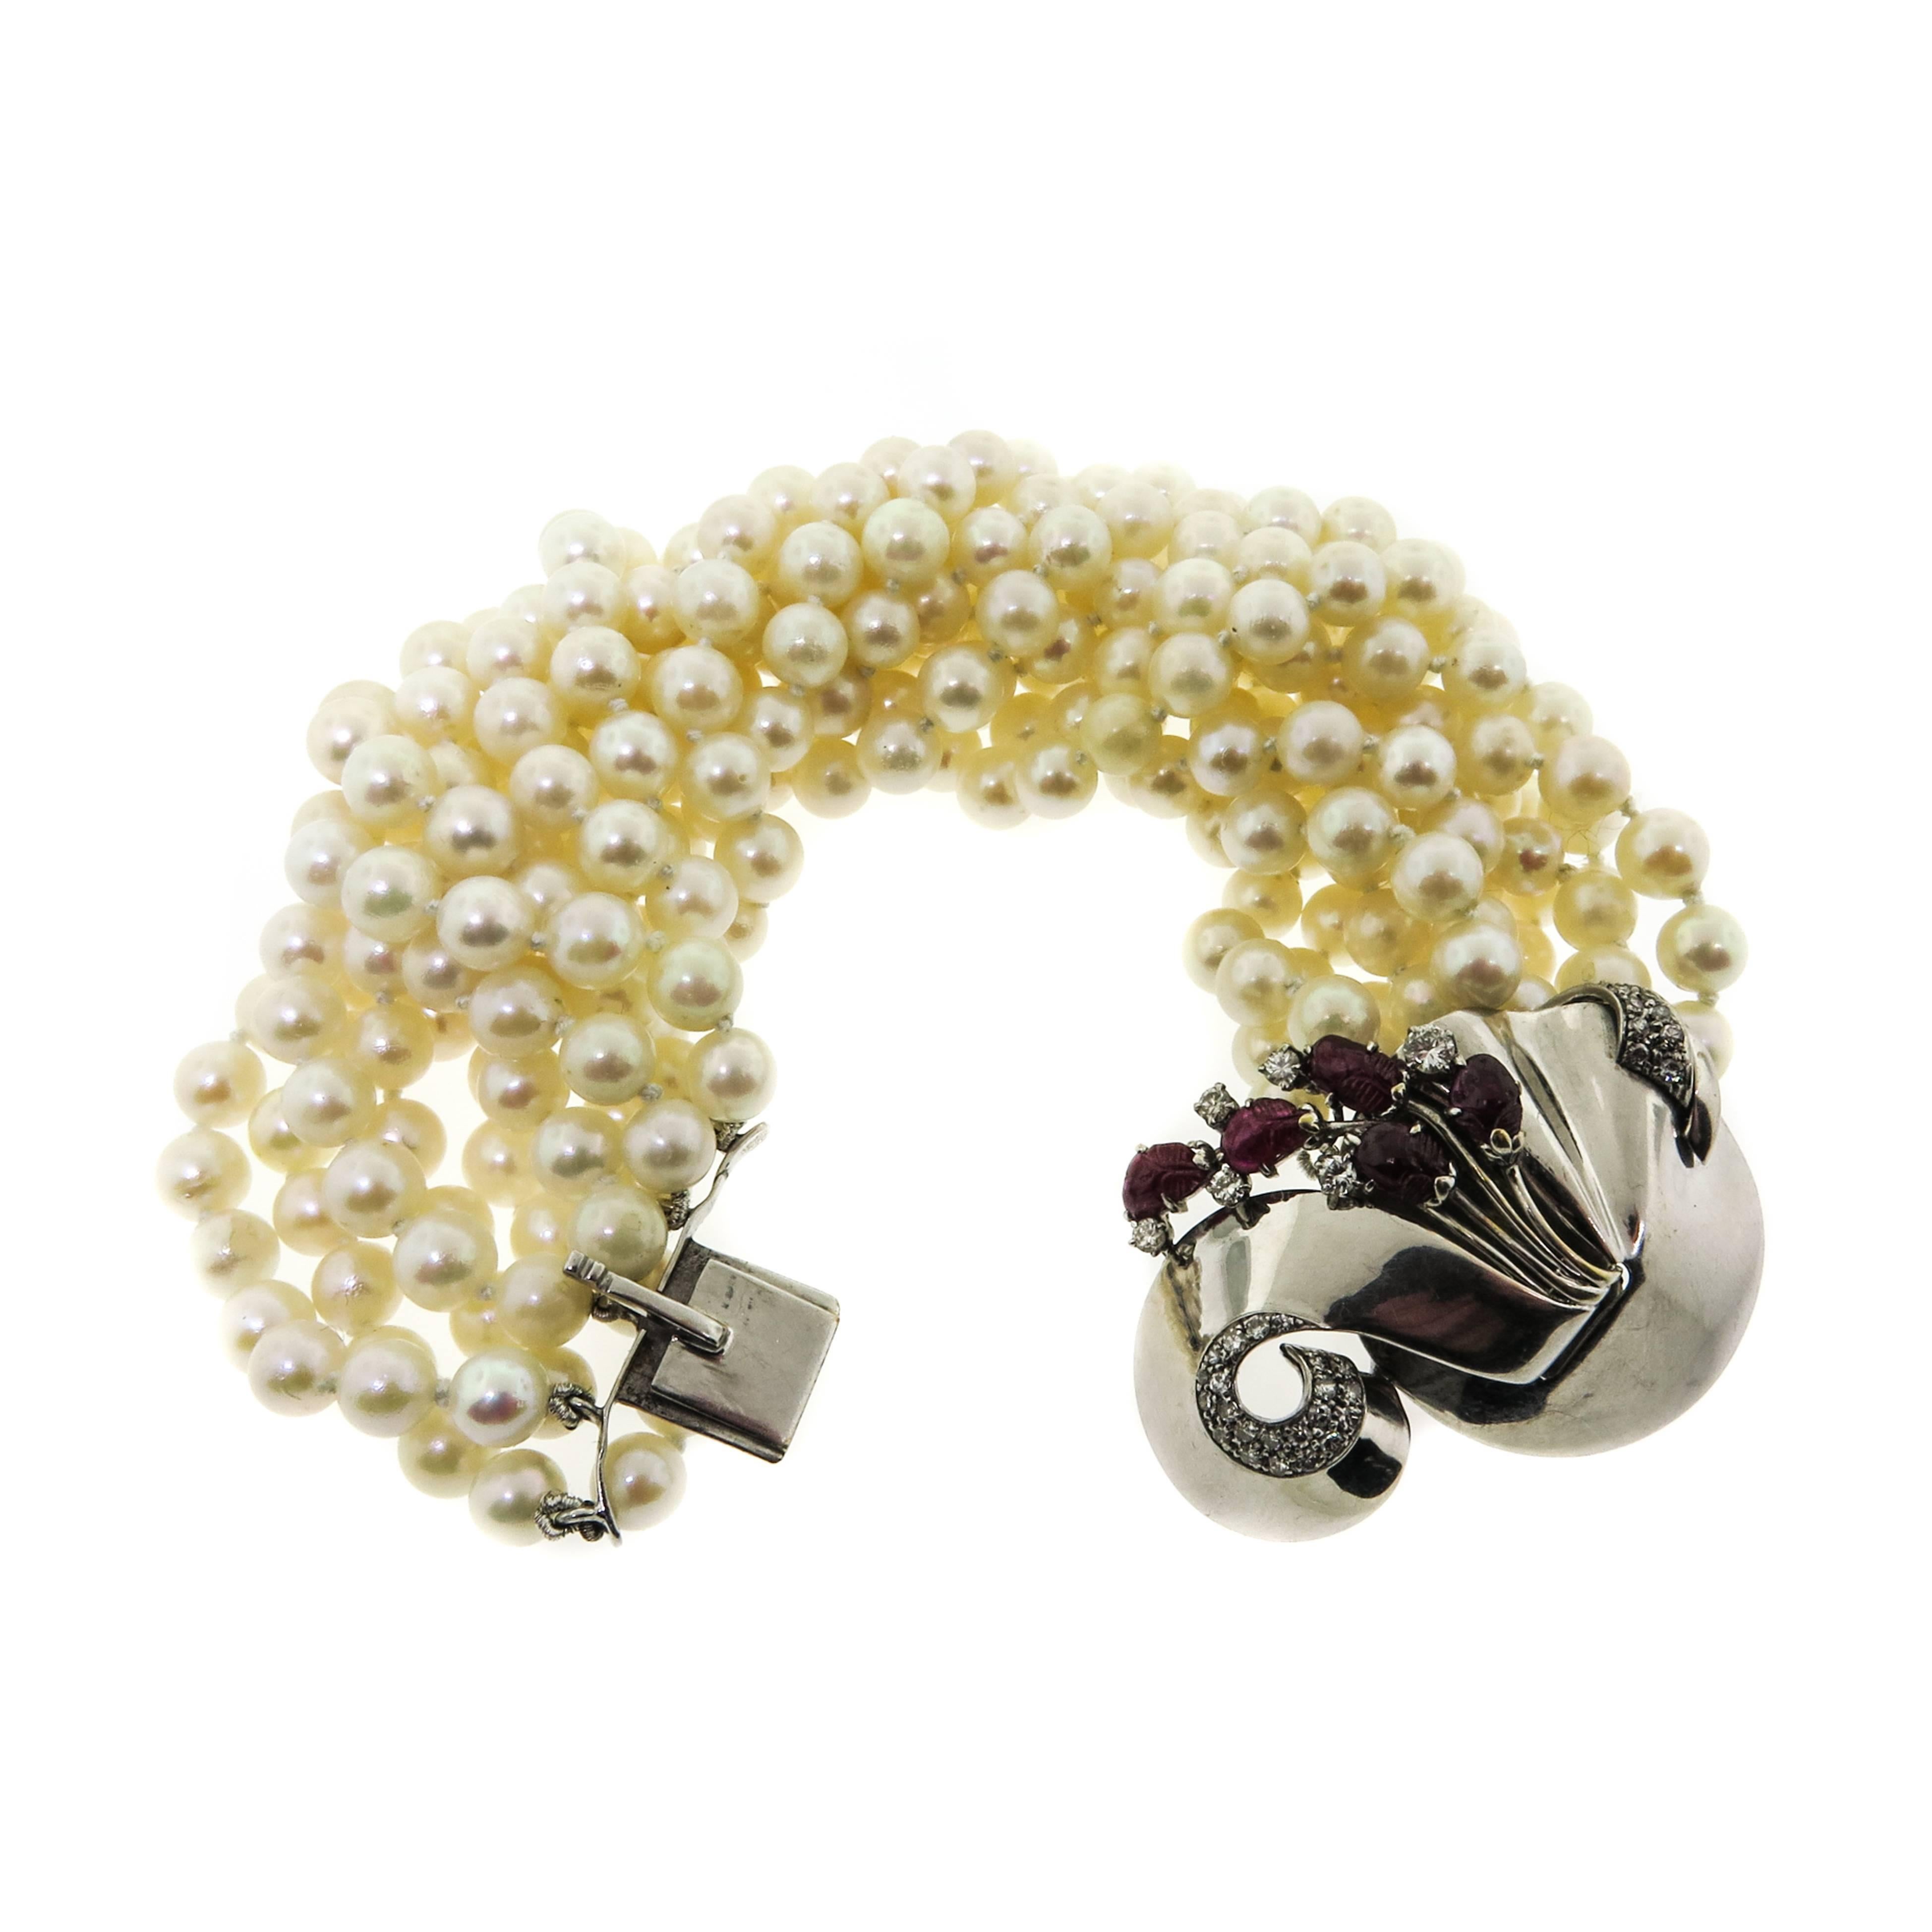 Every lady needs a fabulous pearl bracelet in her jewelry collection!. The torsade design of this bracelet is ornamented with a combination of pearls, diamonds and rubies.Centering an elegant 18kt white gold clasp featuring 5 carved cabochon rubies